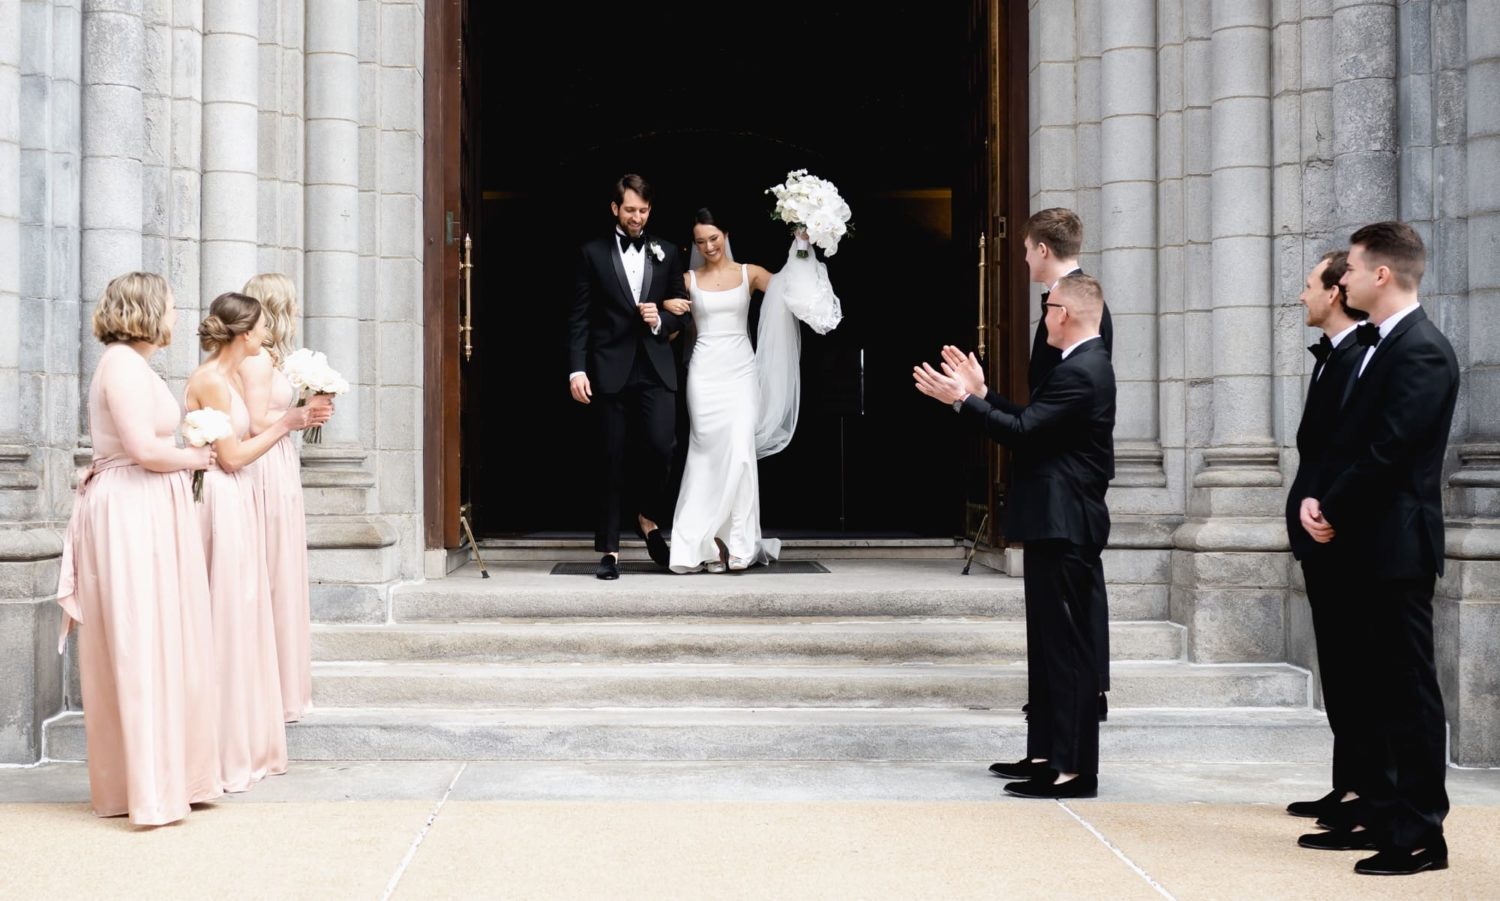 Bride and groom walking out the doors of the cathedral basilica of St. Louis